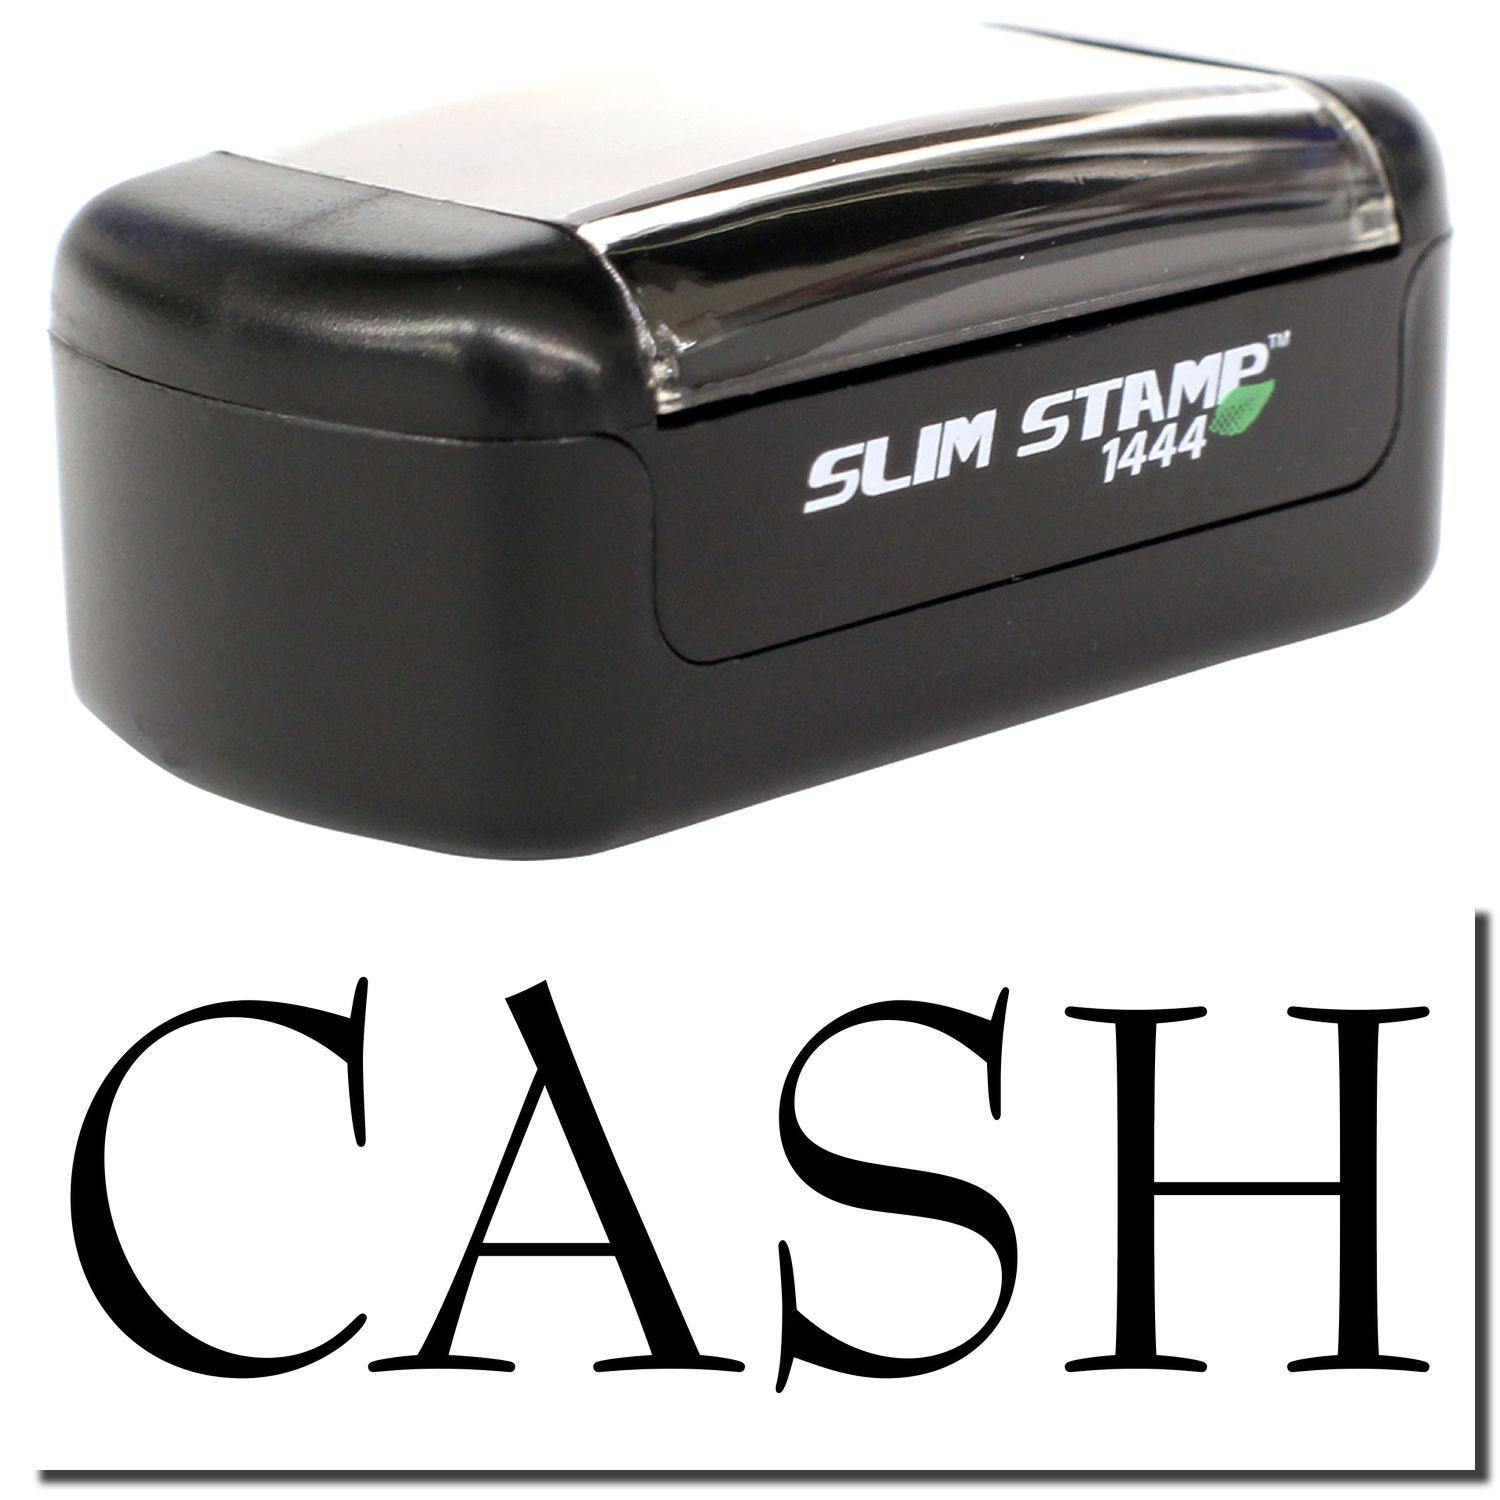 A stock office pre-inked stamp with a stamped image showing how the text "CASH" is displayed after stamping.